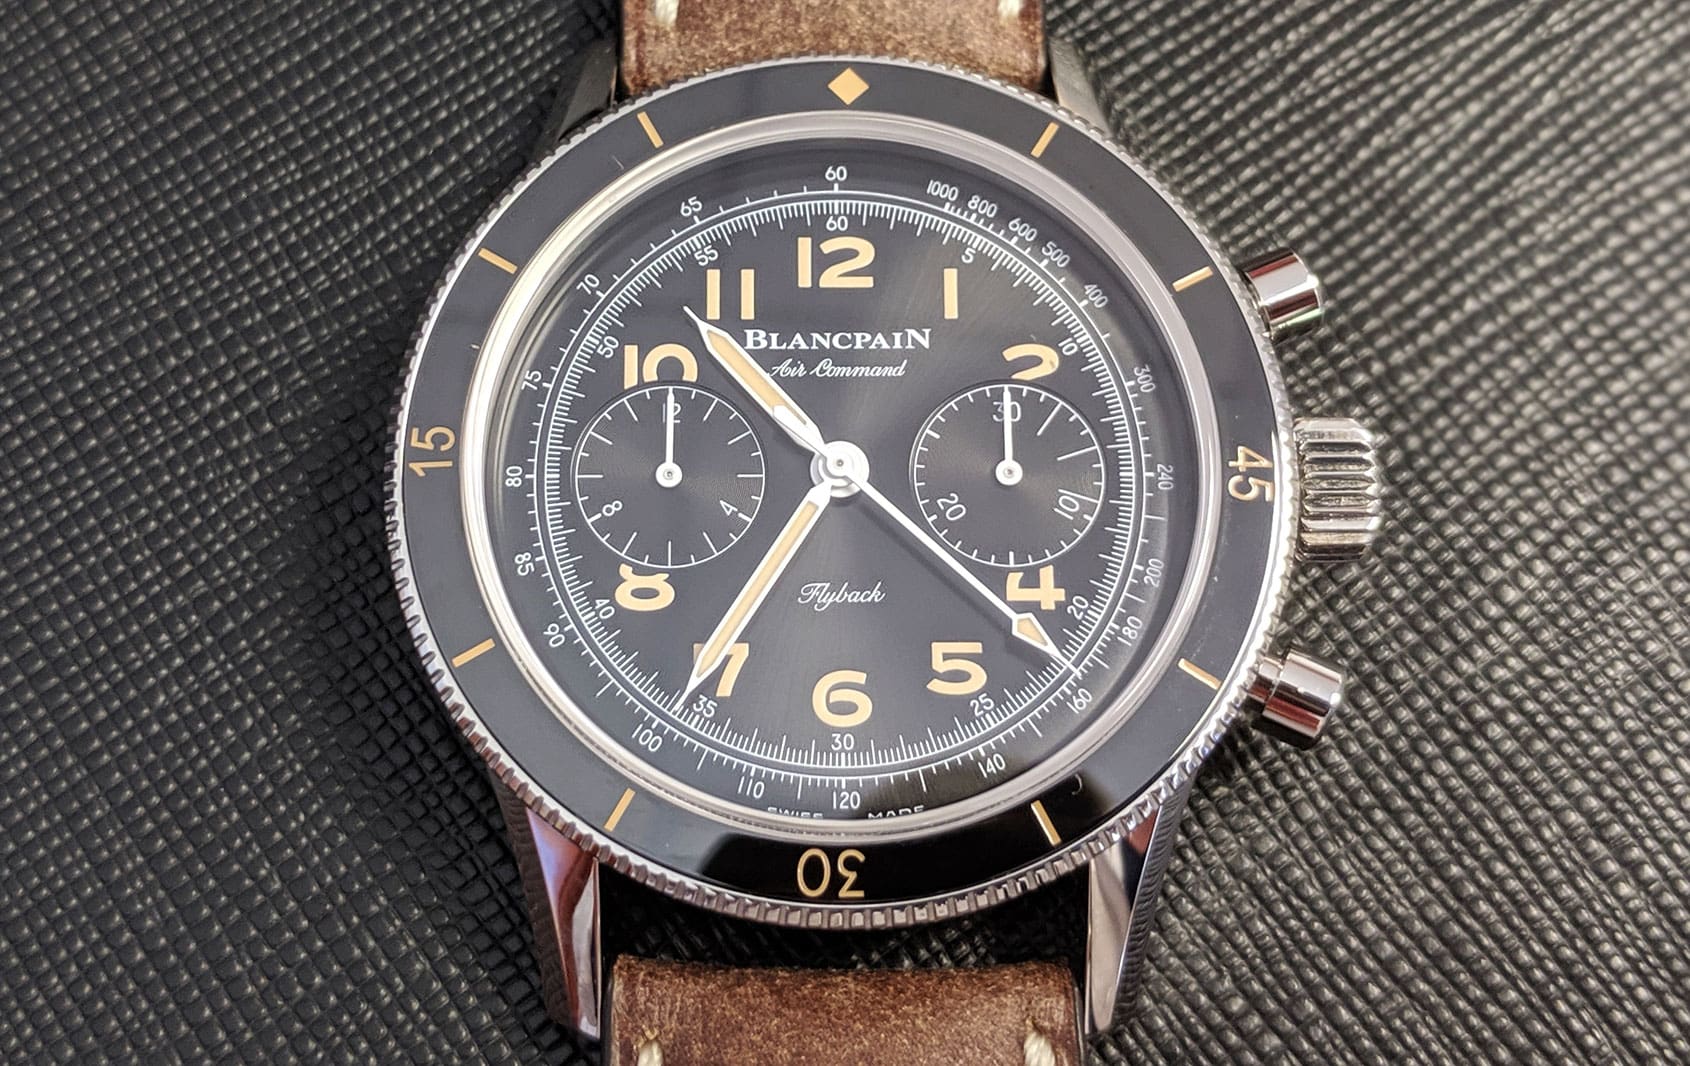 INTRODUCING: The Blancpain Air Command